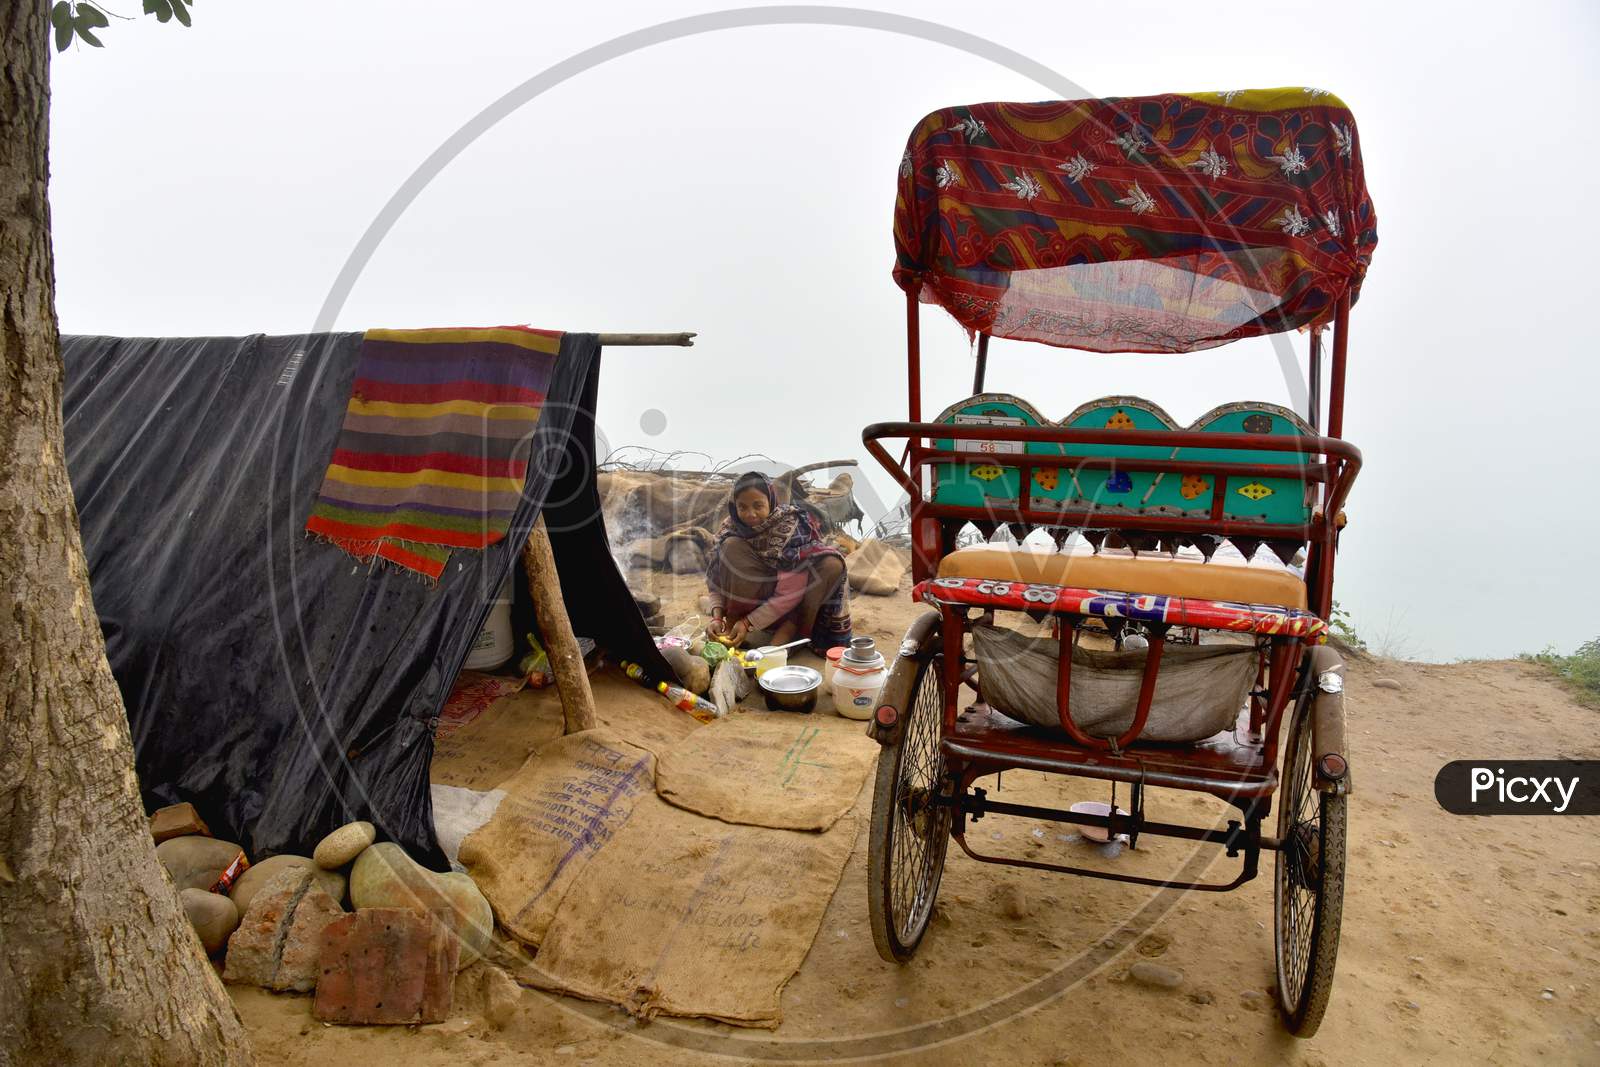 Indian Poor Families Living in Road side tents Or Huts